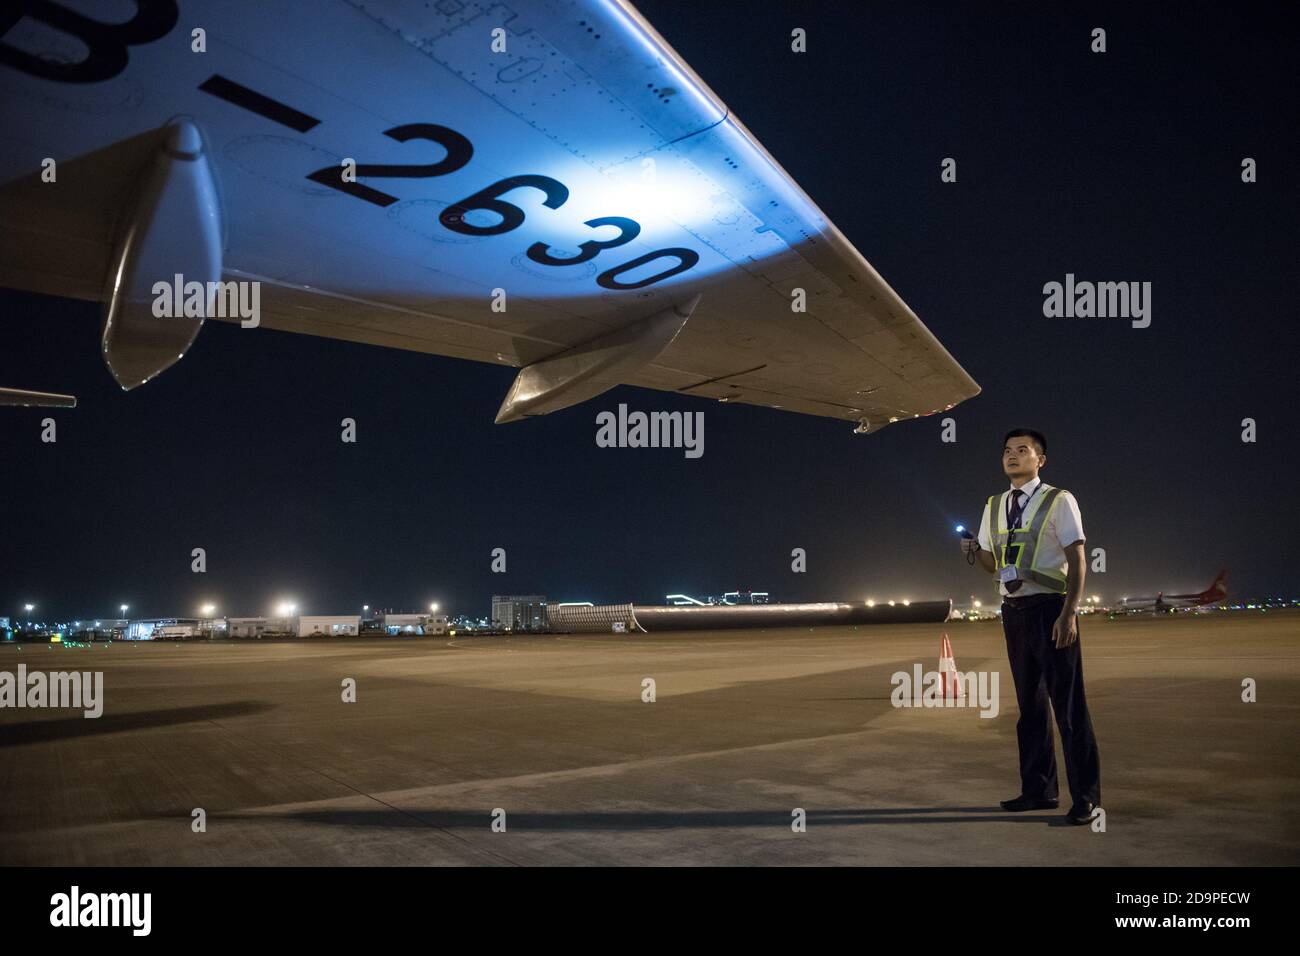 (201107) -- SHENZHEN, Nov. 7, 2020 (Xinhua) -- Wang Qinjin checks the wings of a plane at Bao'an International Airport in Shenzhen, south China's Guangdong Province, Sept. 9, 2020. Wang Qinjin, a young man from Leping of east China's Jiangxi Province, came to Shenzhen to search for a job after graduating from college in July of 2009. Attracted by the talent training program of the SF Express Co., Ltd., Wang applied for the company's warehouse keeper and delivery man, and was soon recruited in. He worked very hard, being selected as a future manager eight months later. Also in the year 2 Stock Photo